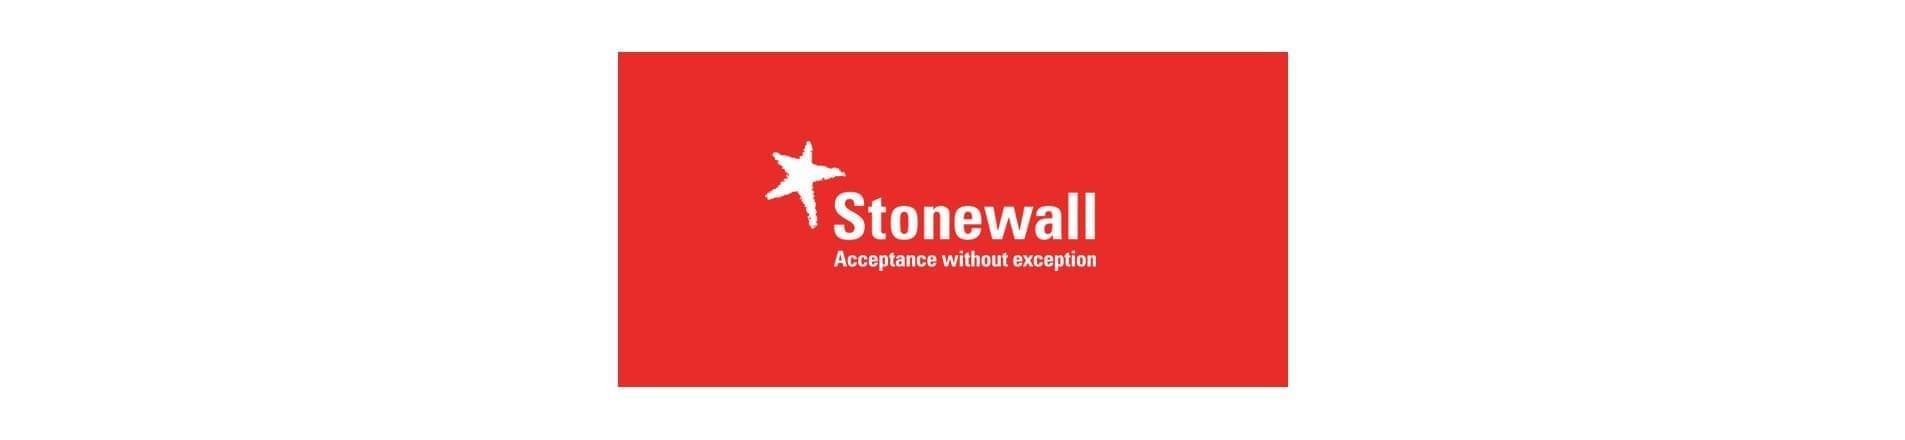 Stone Wall Logo - Stonewall Commemorates the Top Global Employers for LGBT Staff